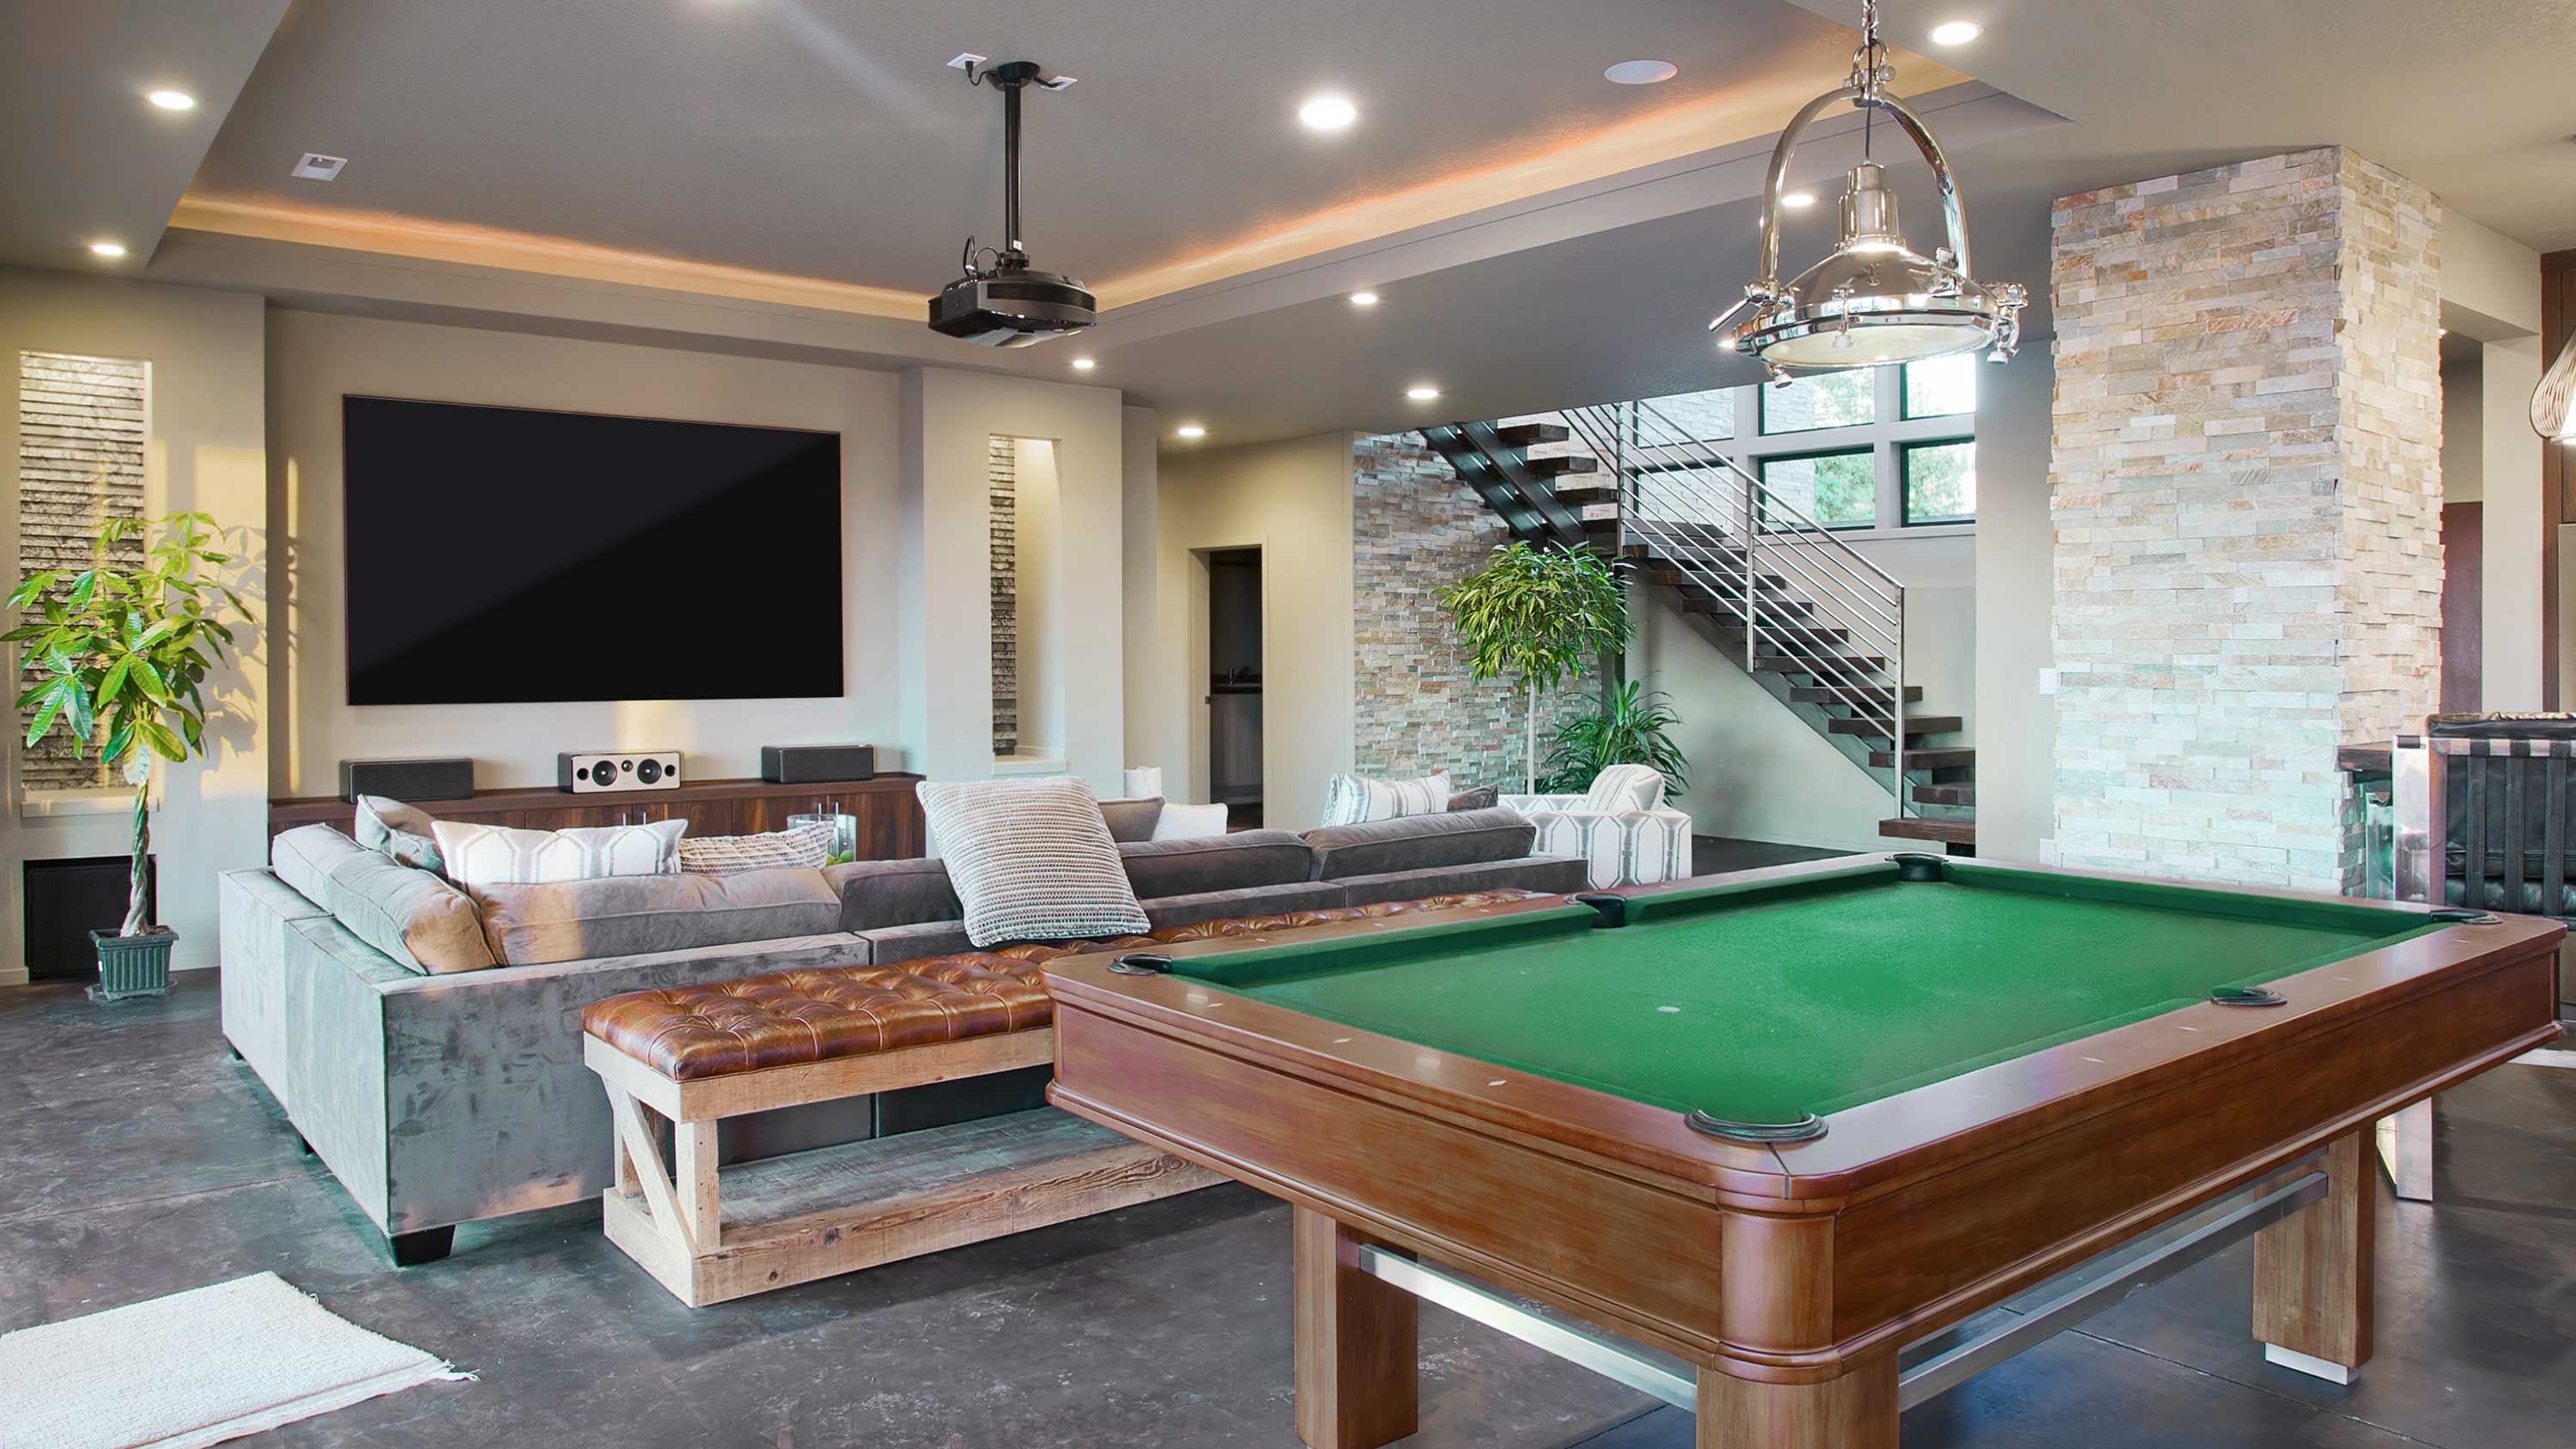 Game Room, Pool Table, TV, Projector